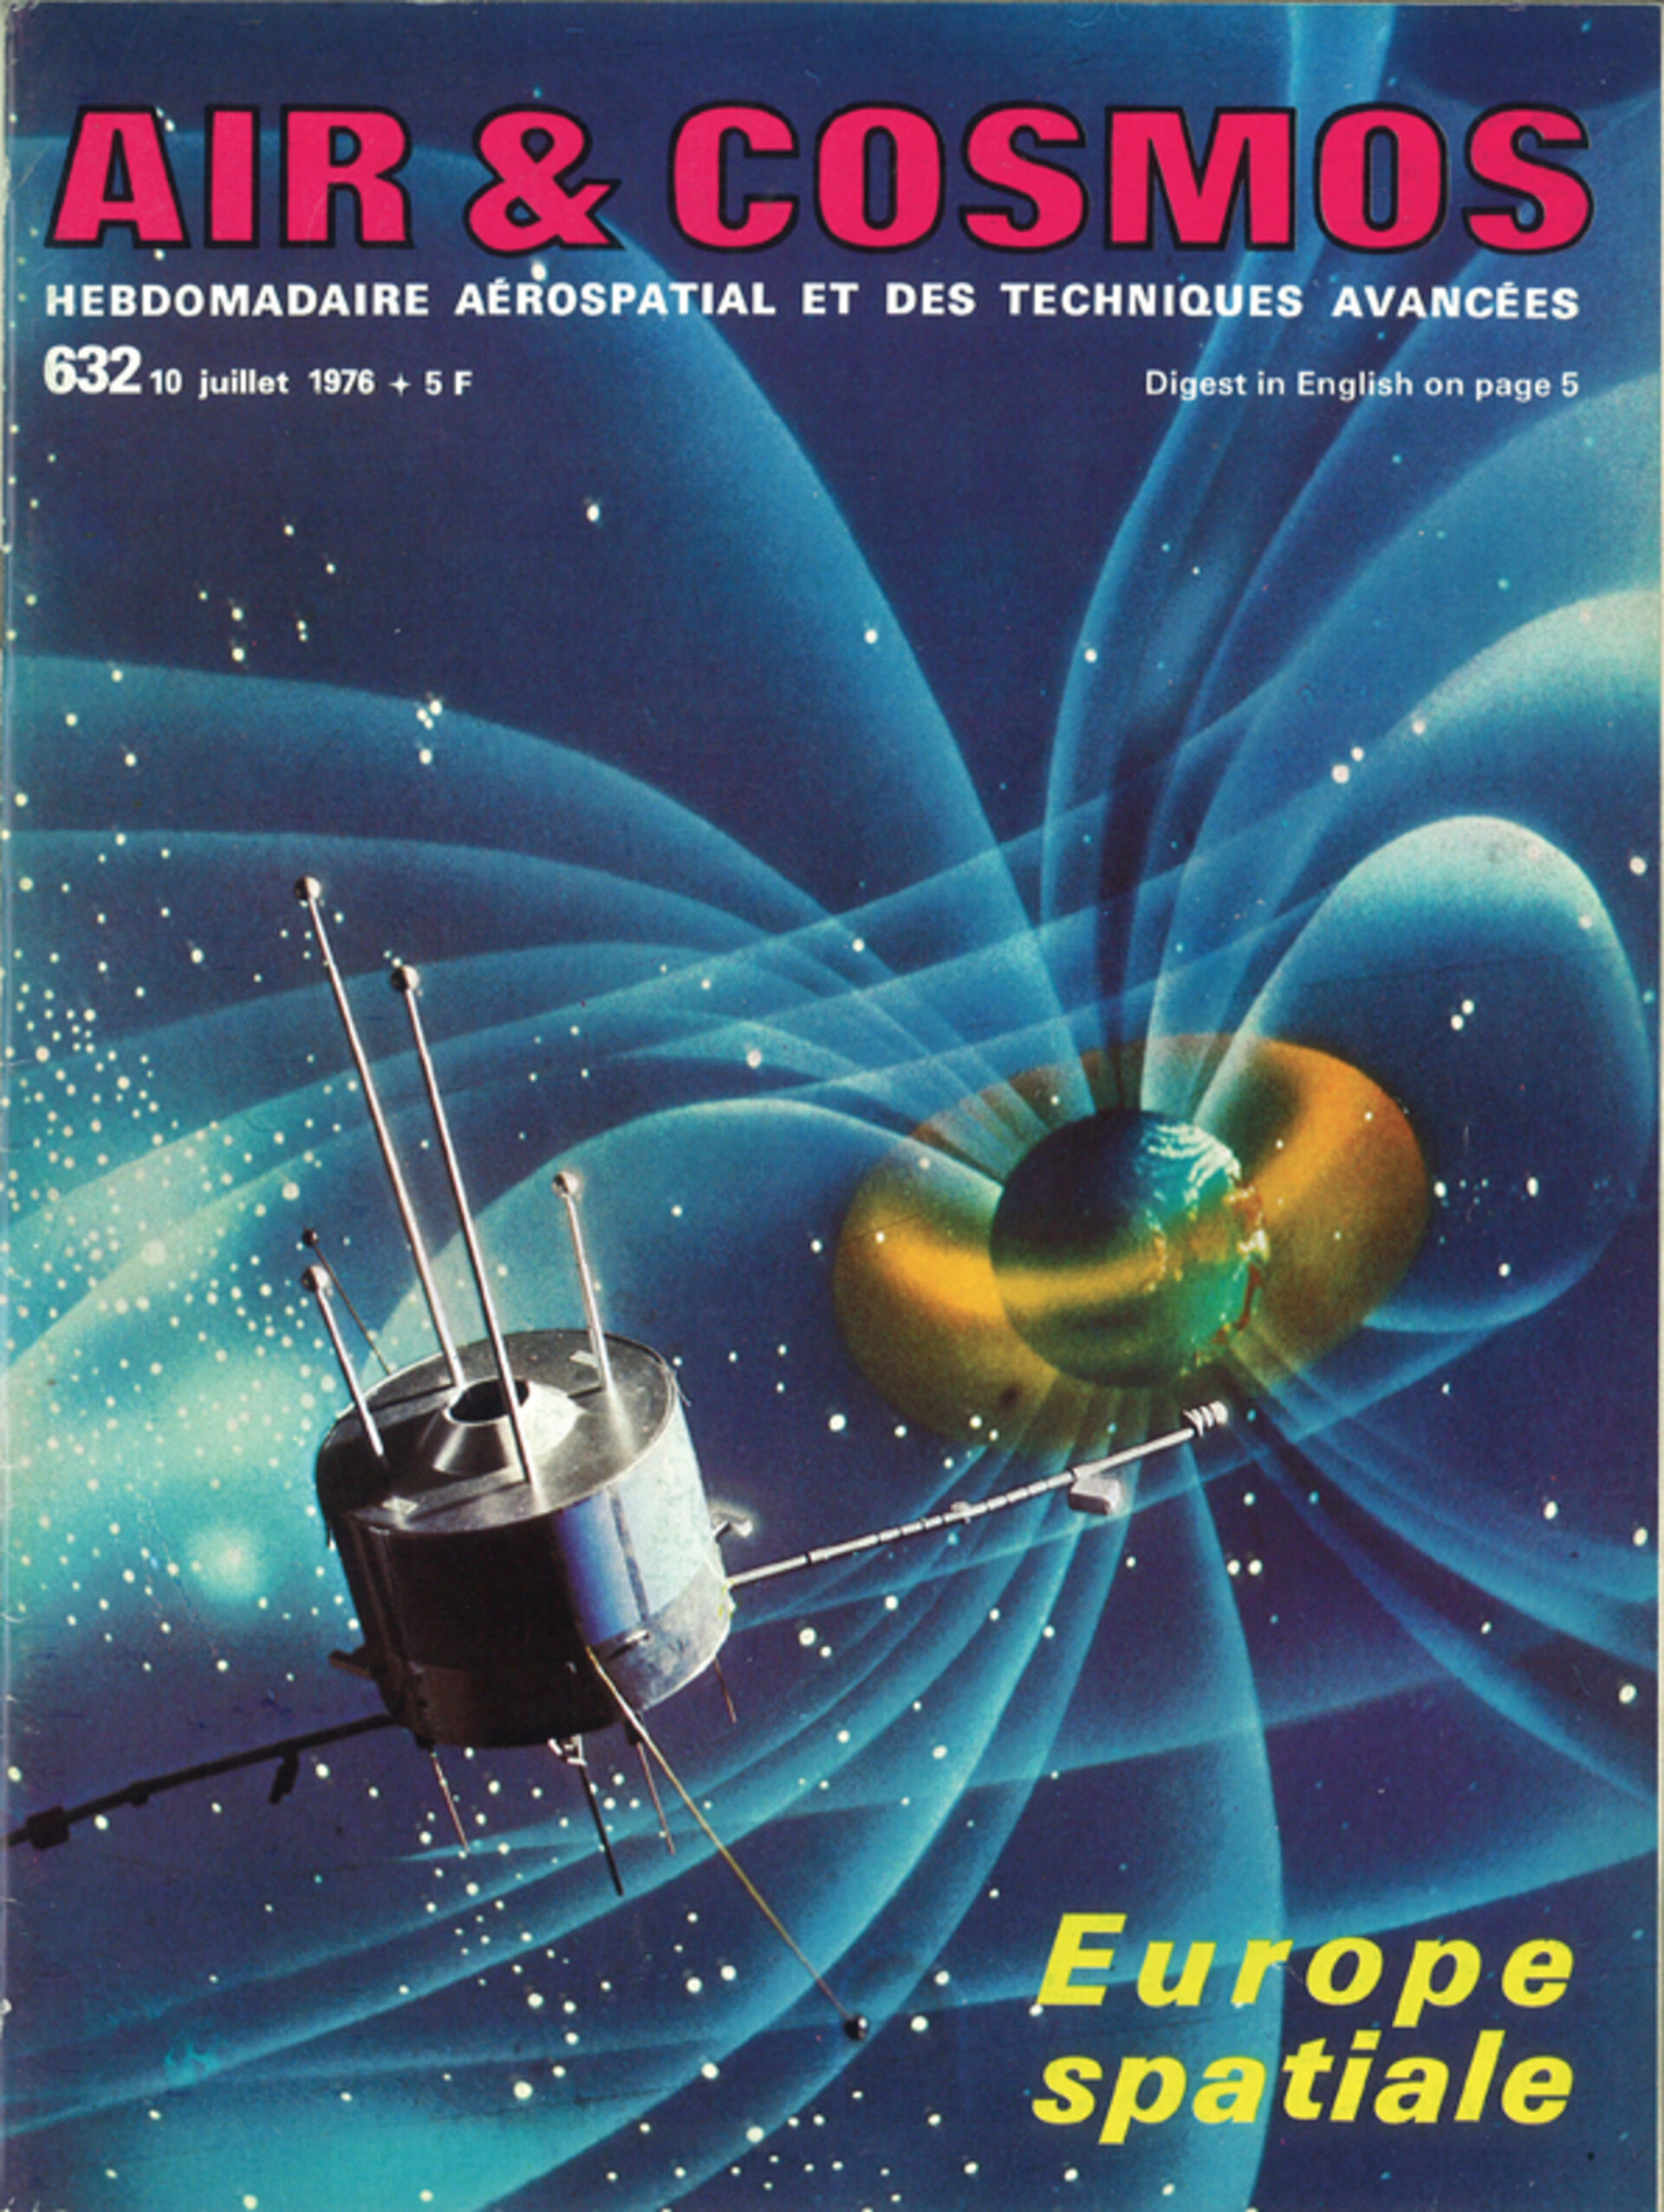 Air & Cosmos July 1976 edition cover